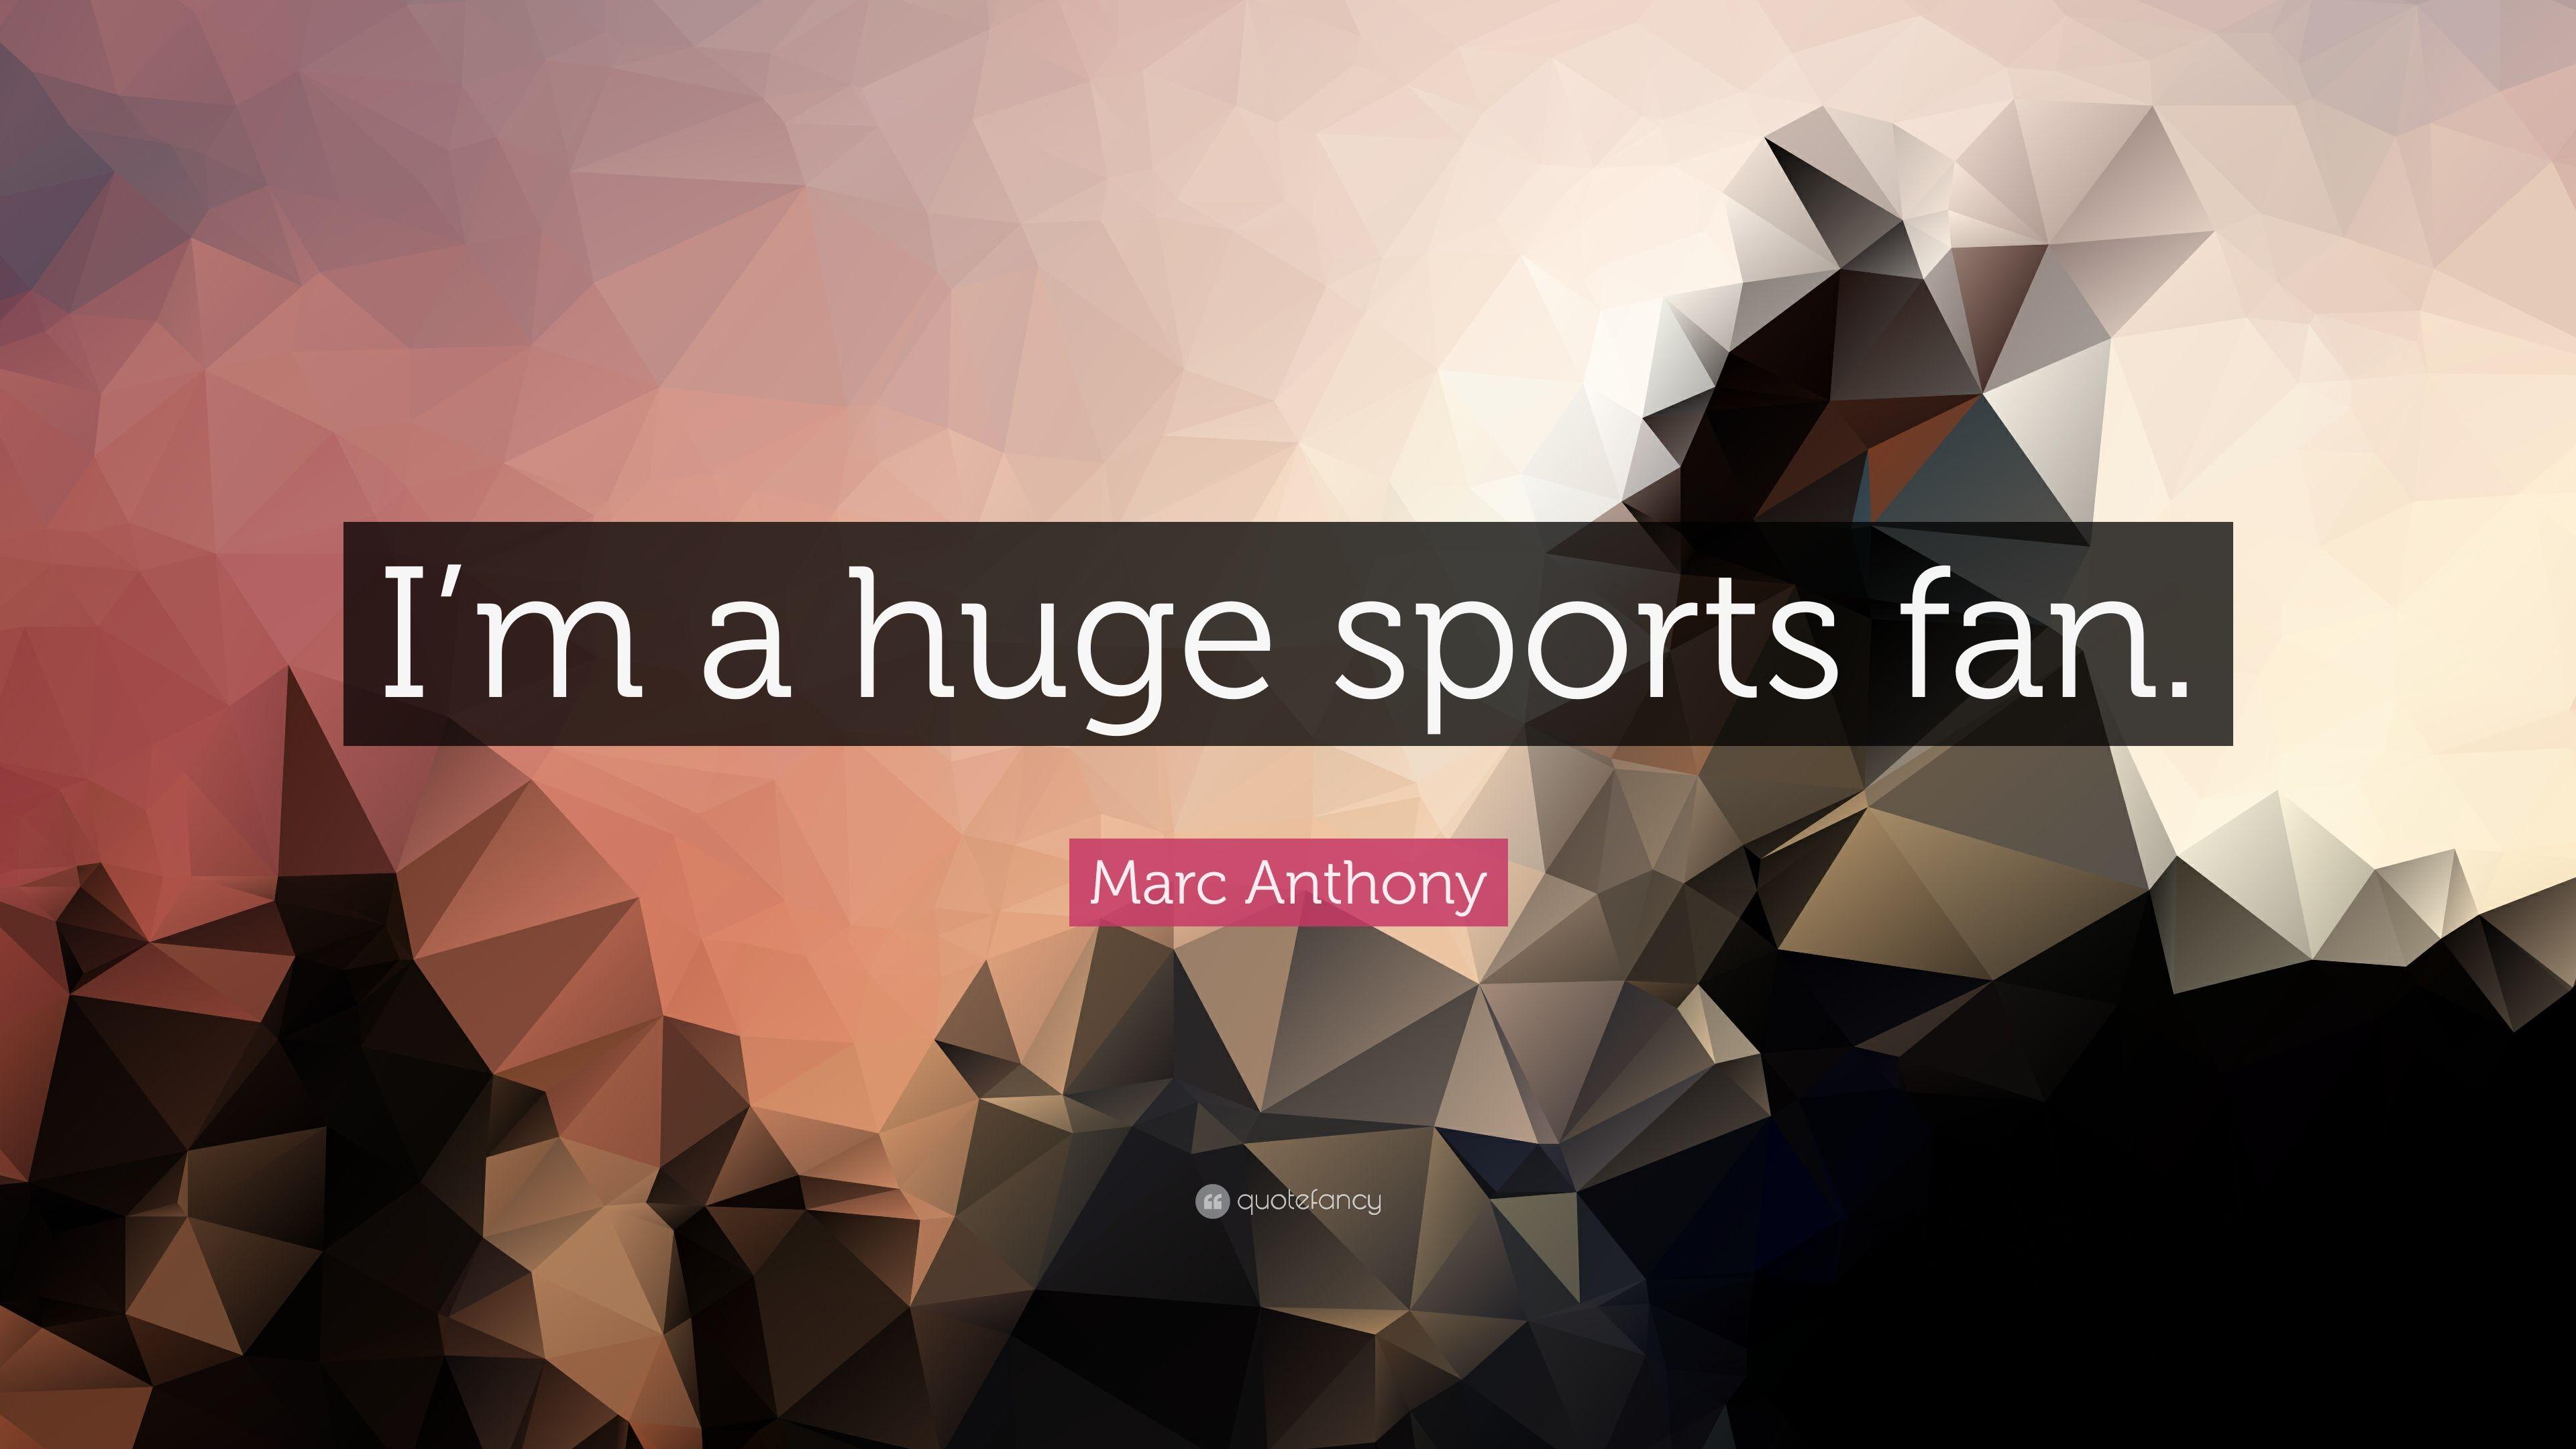 Marc Anthony Quote: “I'm a huge sports fan.” (7 wallpaper)